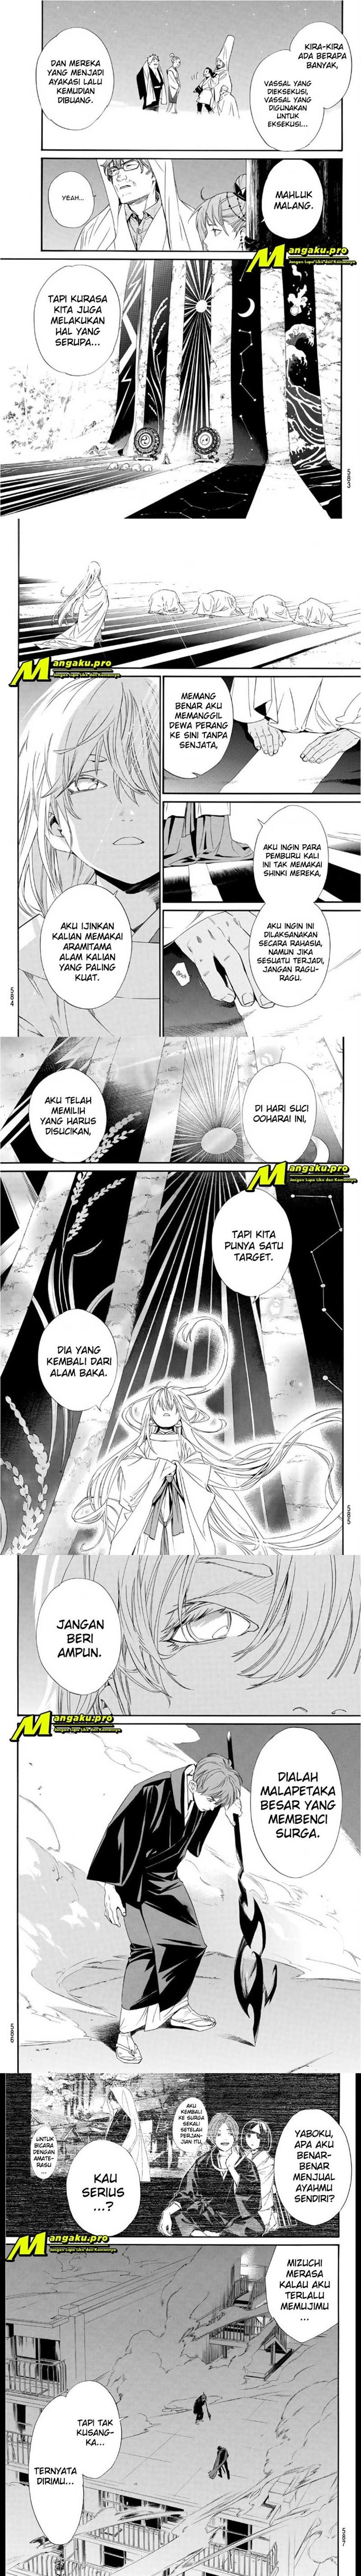 Noragami Chapter 93